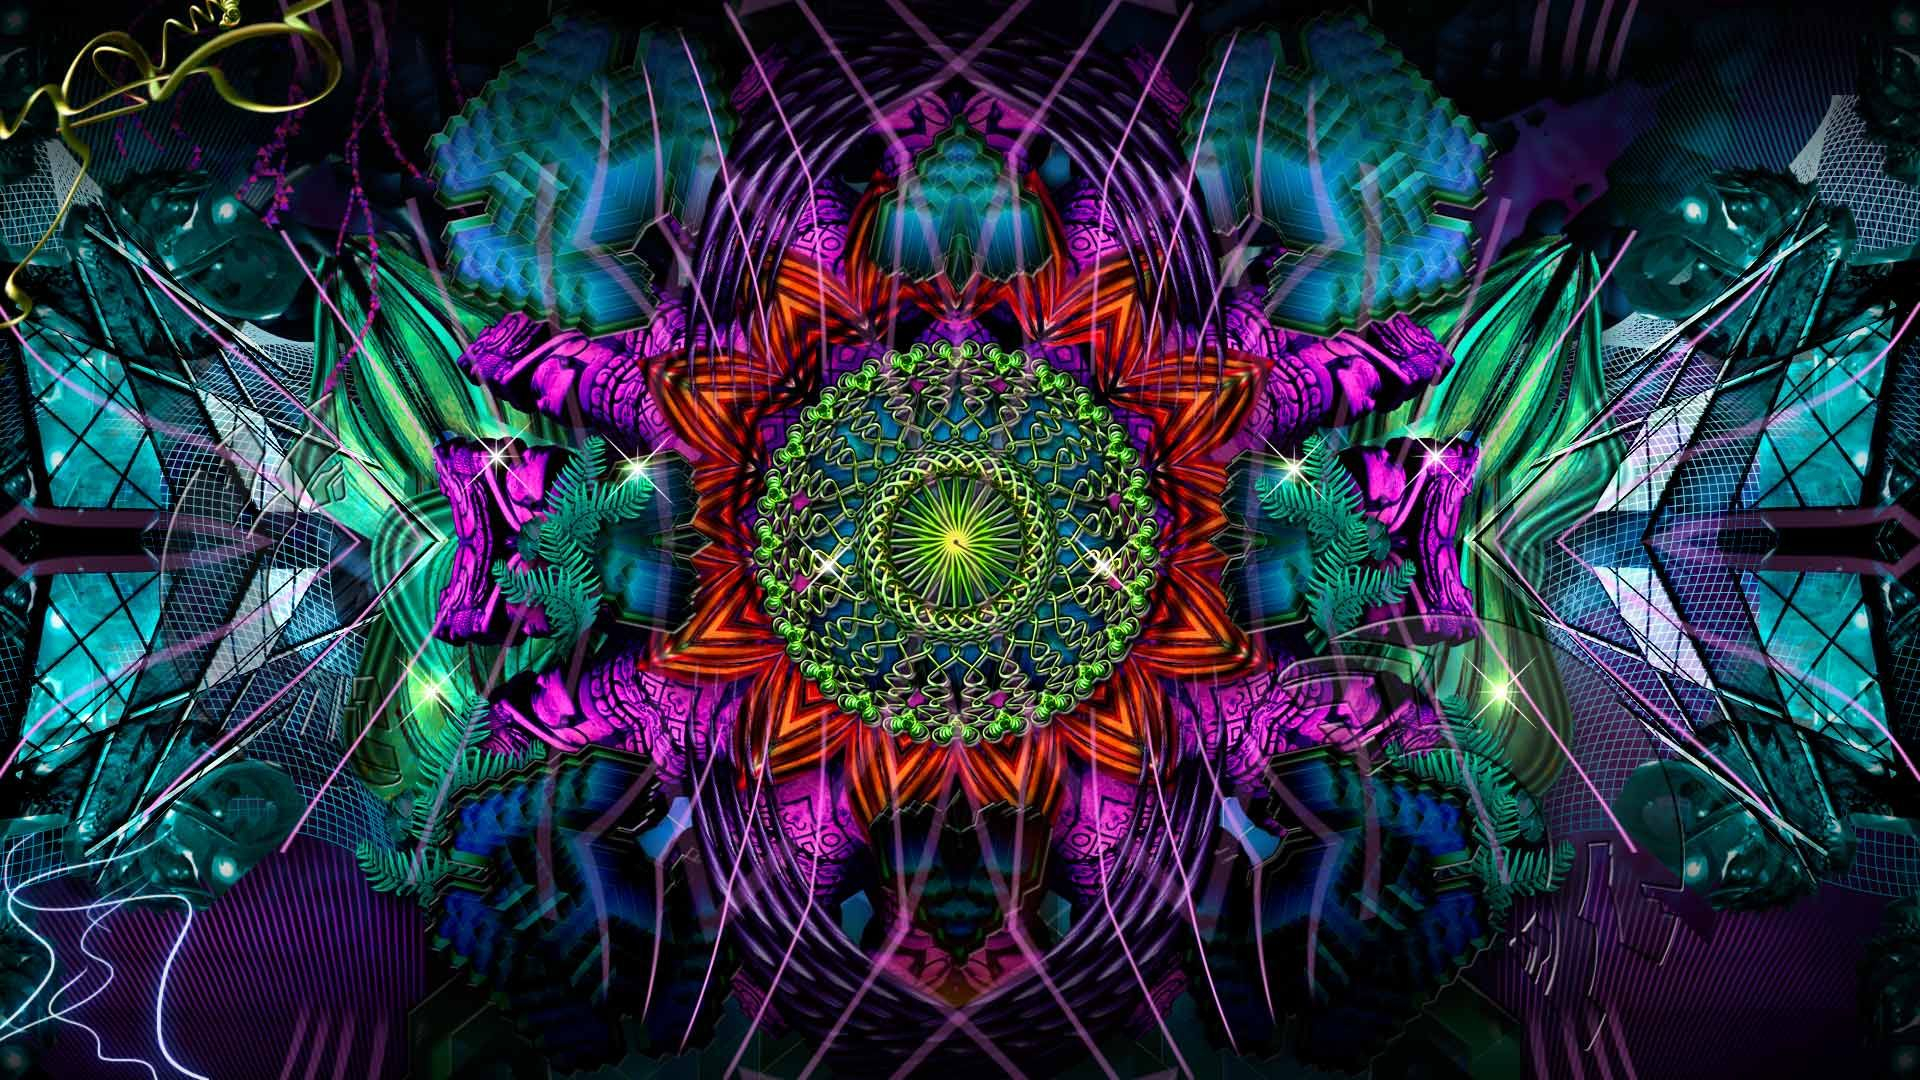 1920x1080 Psychedelic Experience | Psychedelic art, Trippy wallpaper, Fractal art